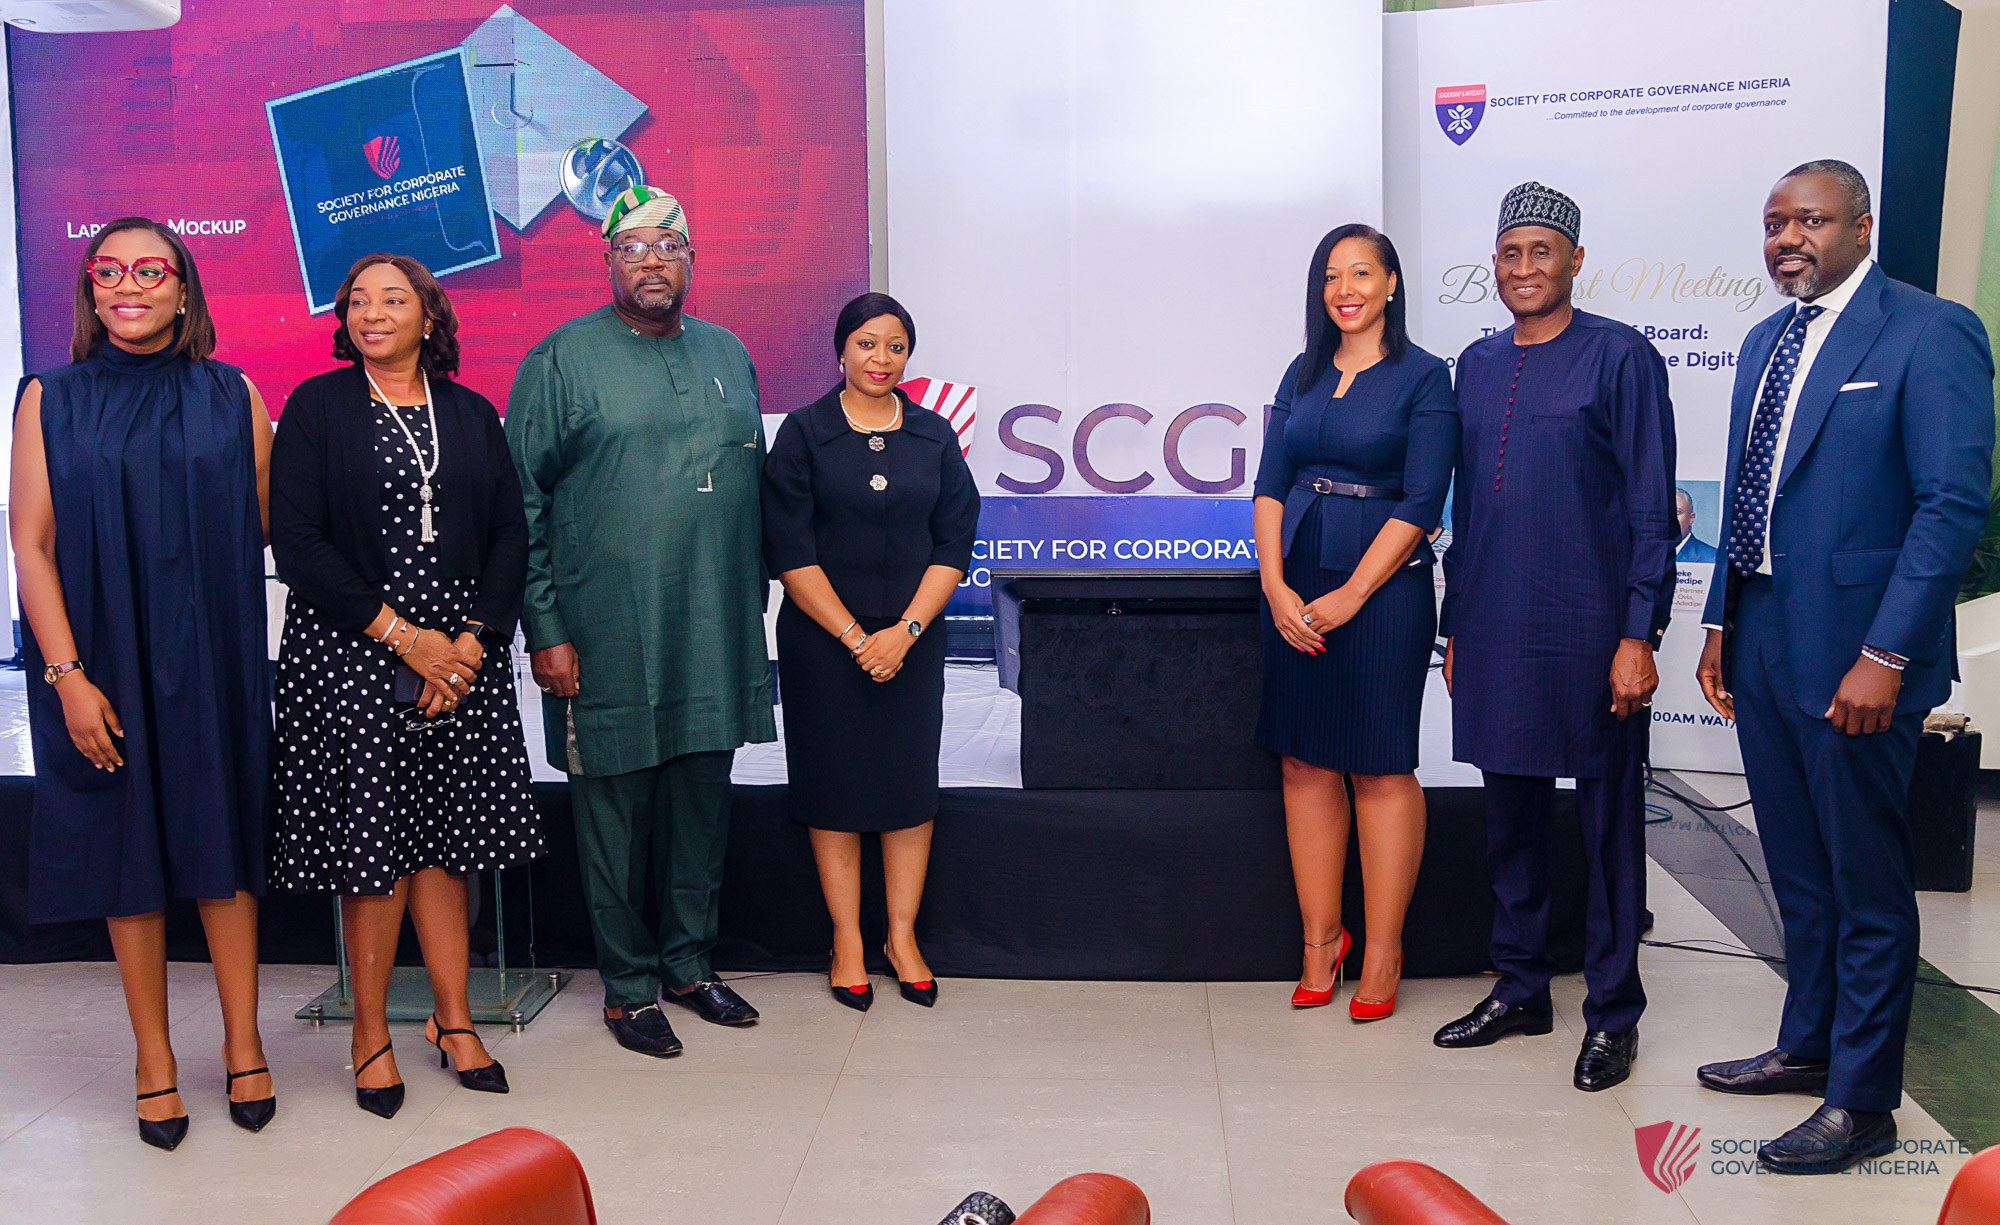 2022 Corporate Governance Breakfast Meeting Hosted By The Society for Corporate Governance Nigeria